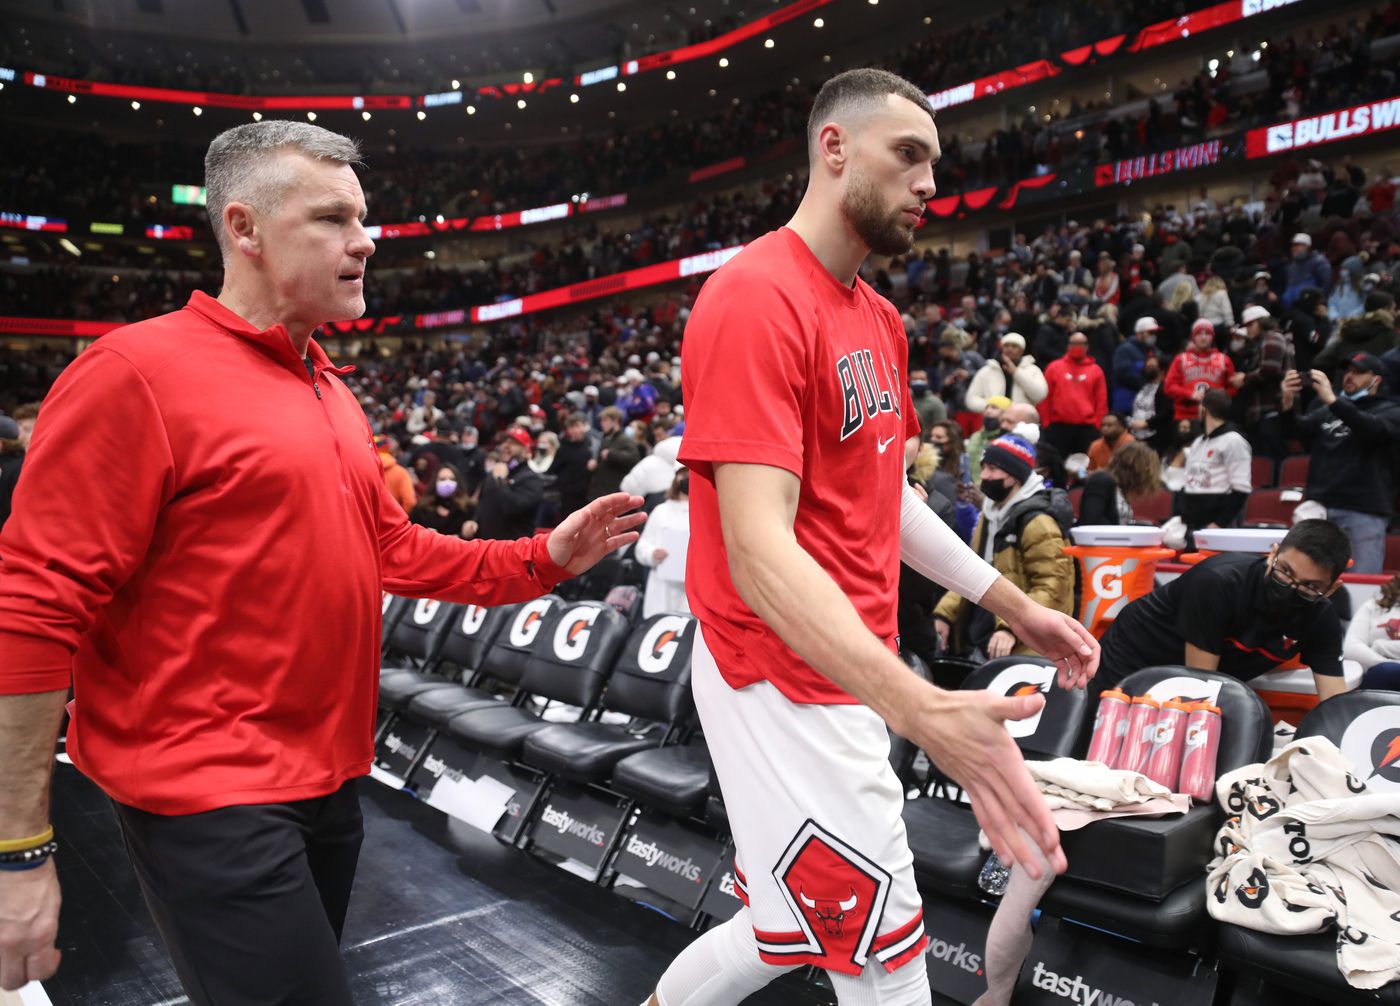 Chicago Bulls head coach Billy Donovan and guard Zach LaVine (8) head to the locker room after a 130-122 win over the Washington Wizards at United Center on Jan. 7, 2022, in Chicago.